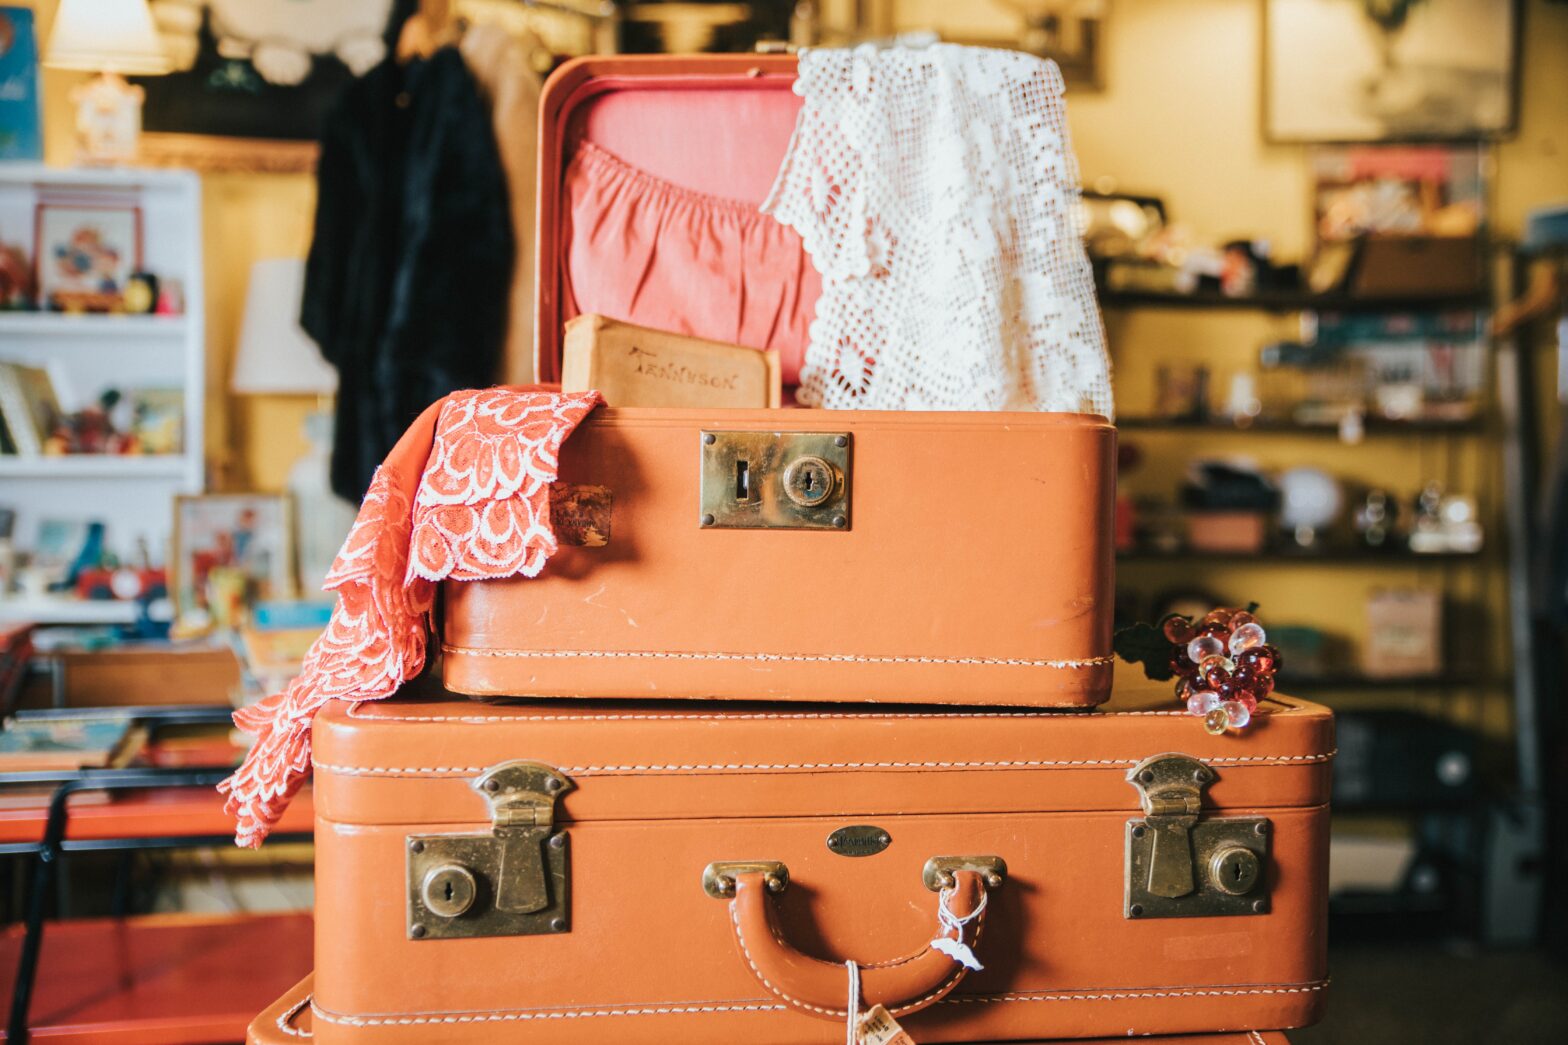 Suitcases, Totes and More with Built-In Organizational Features